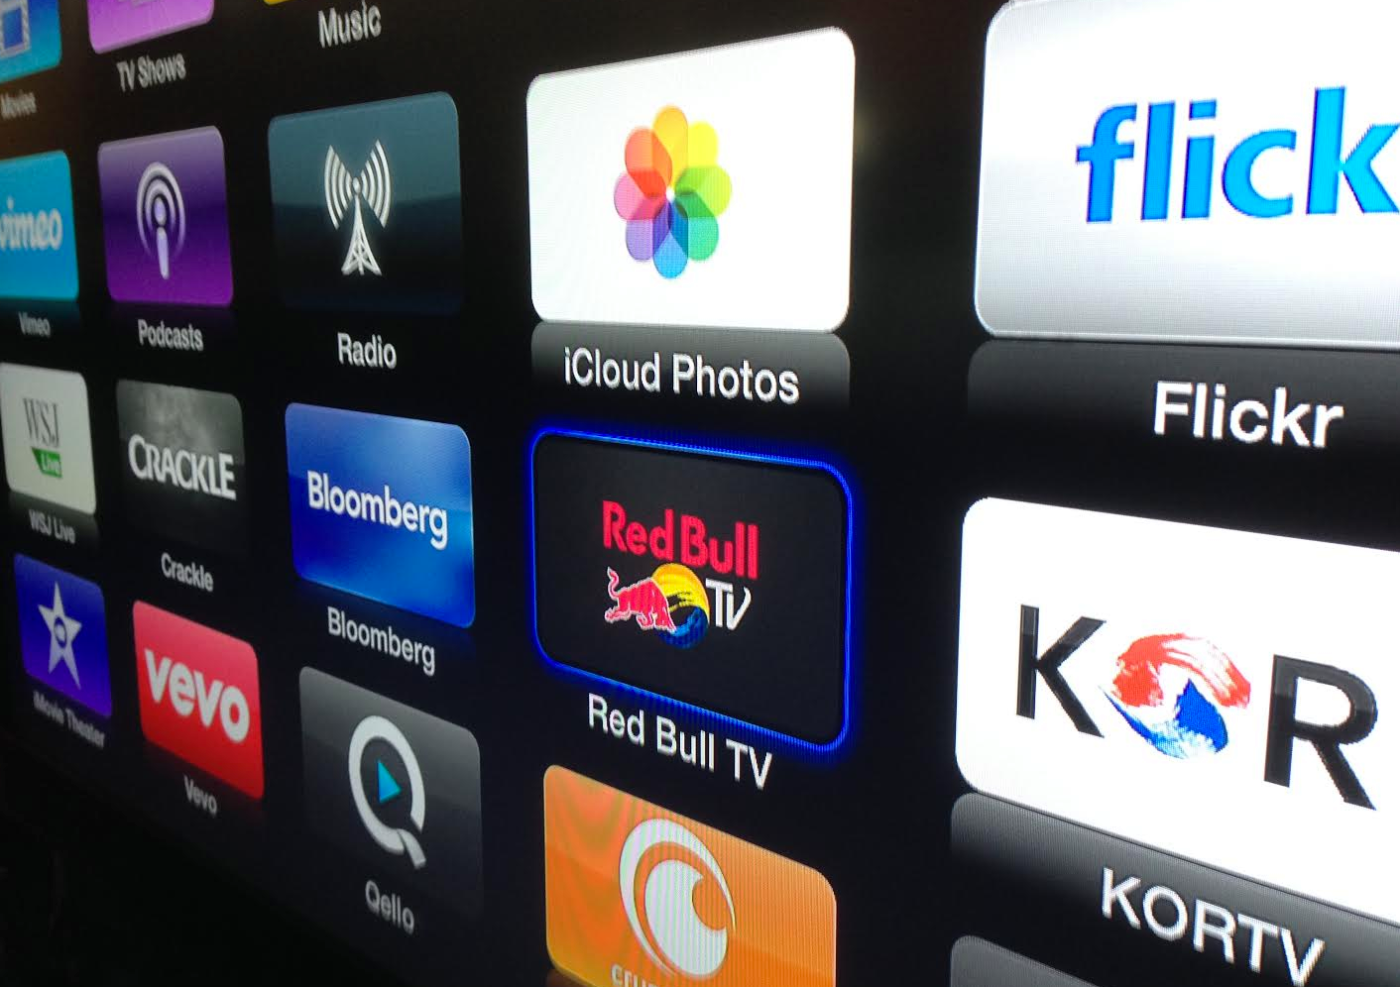 Red Bull channel on the old Apple TV